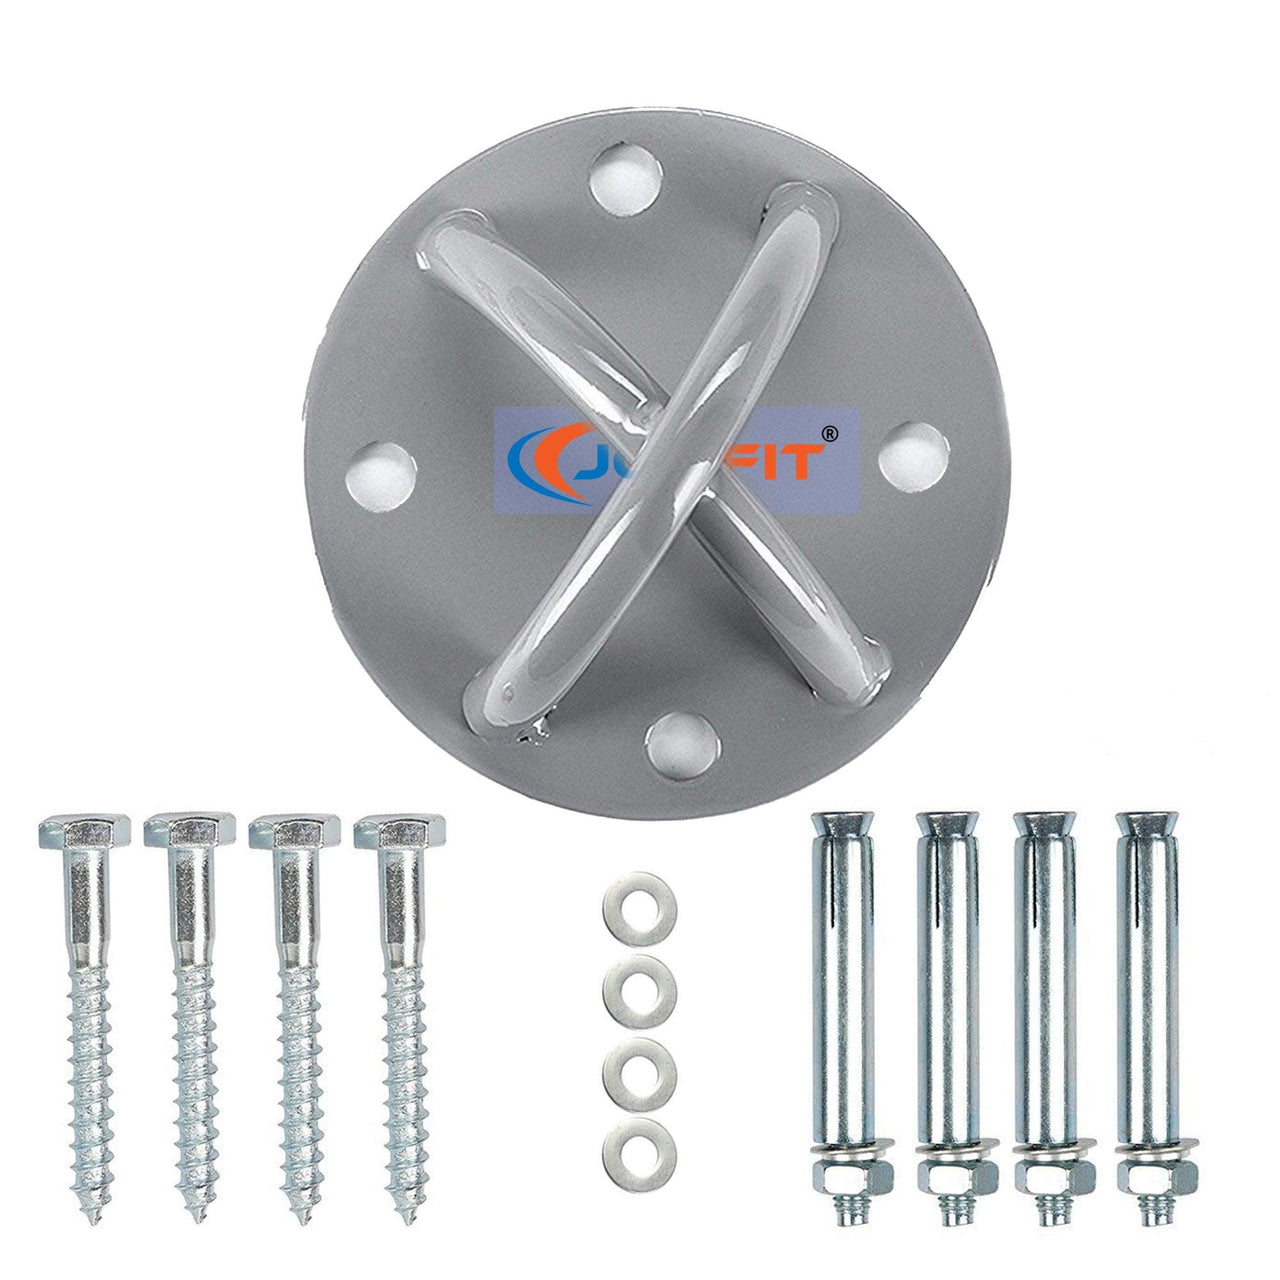 Wall Mount Anchor with bolt and screws - Joyfit